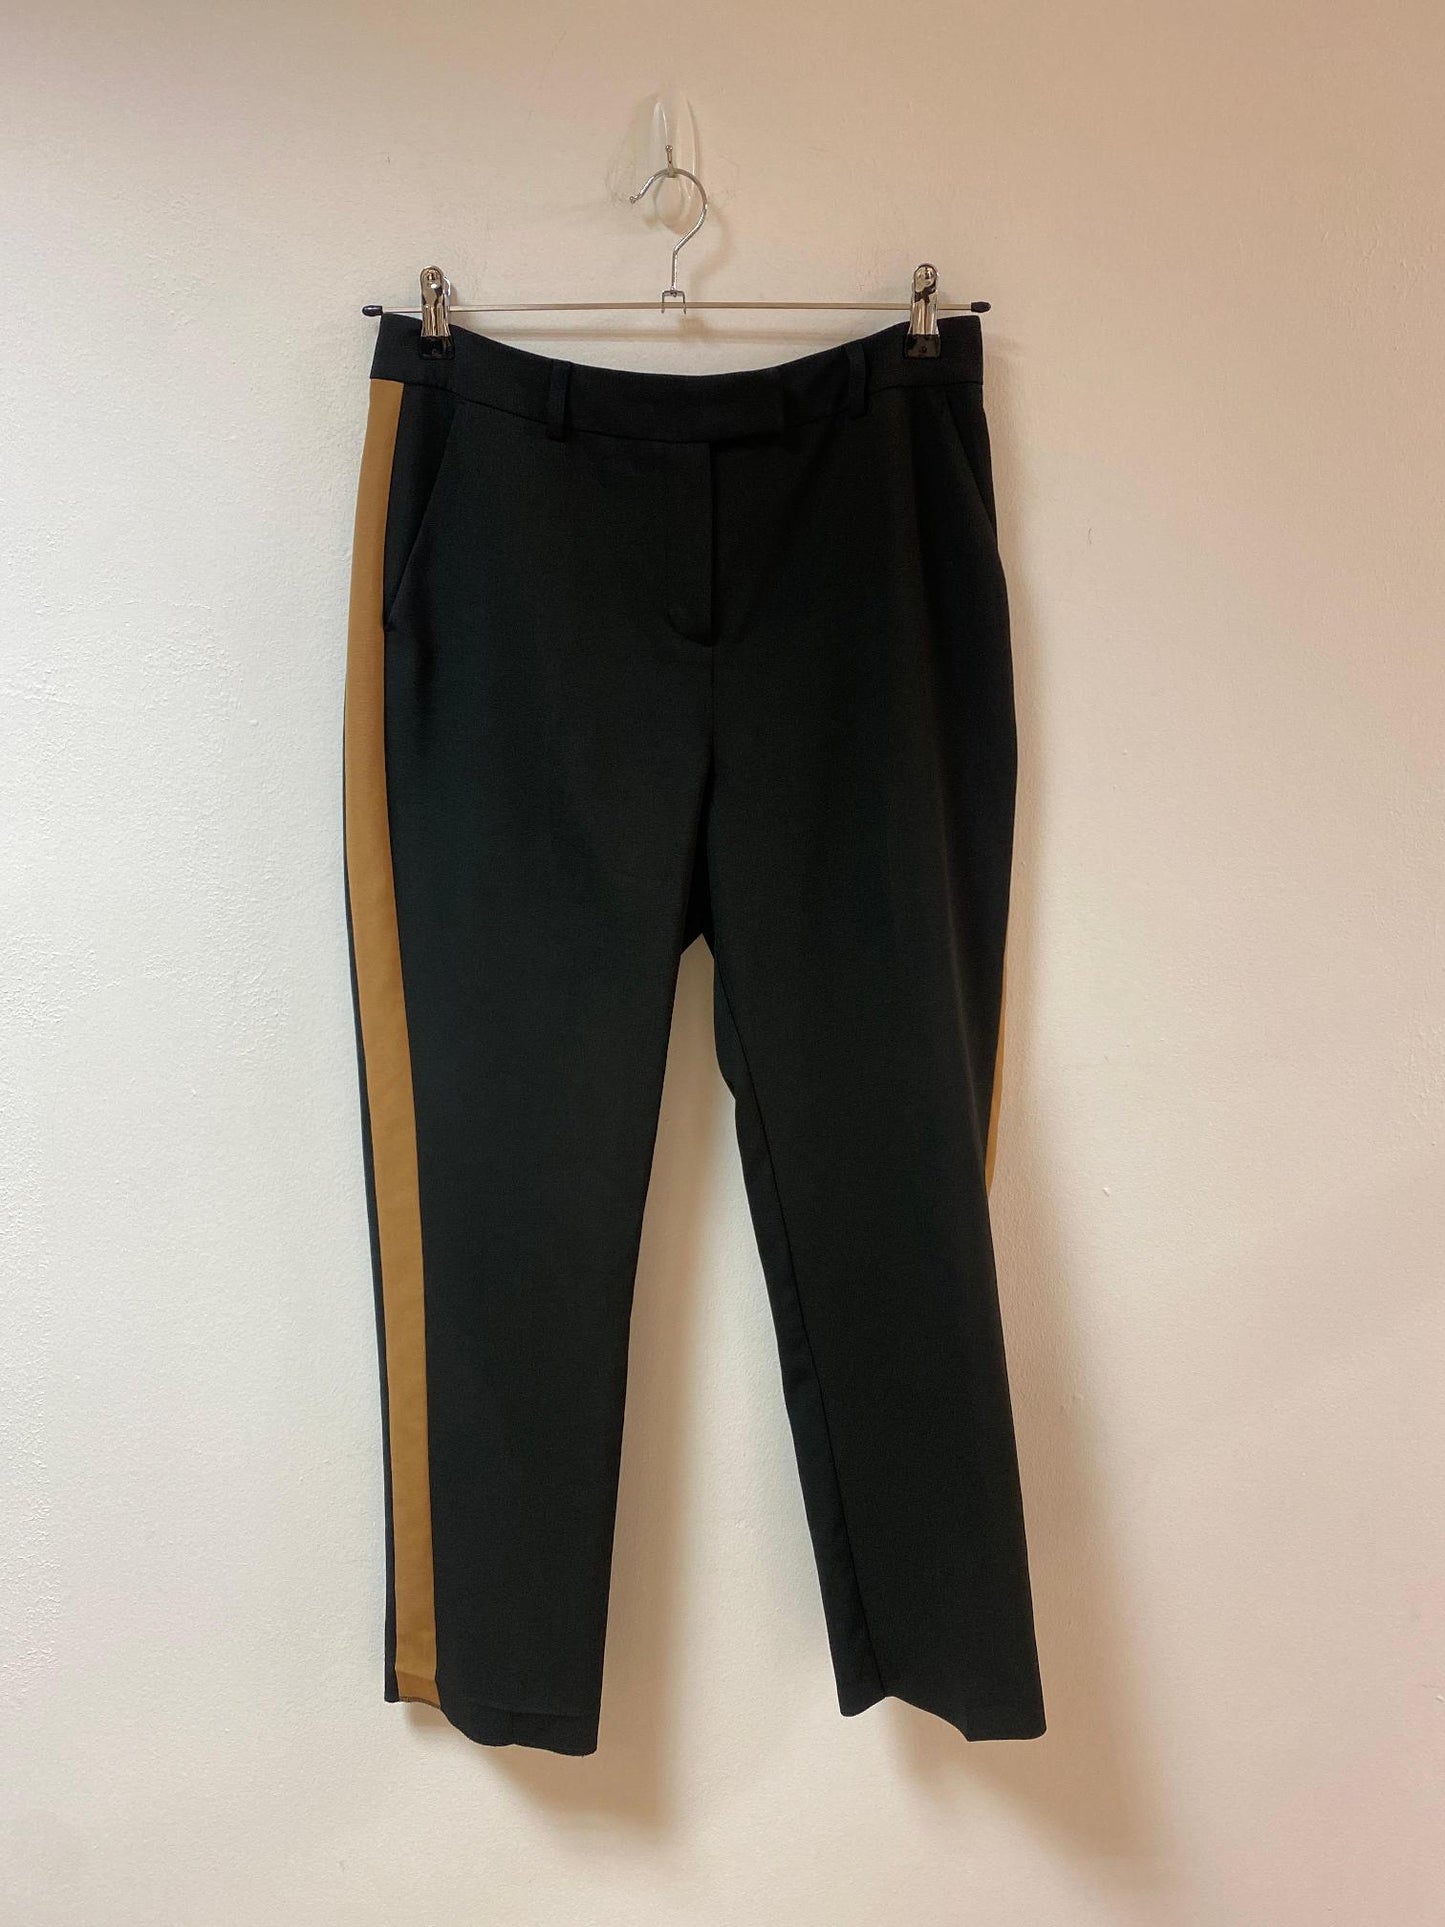 Black high rise tapered tailored trousers with brown stripe on sides, Papaya, Size 12 (Elastane, Polyester)